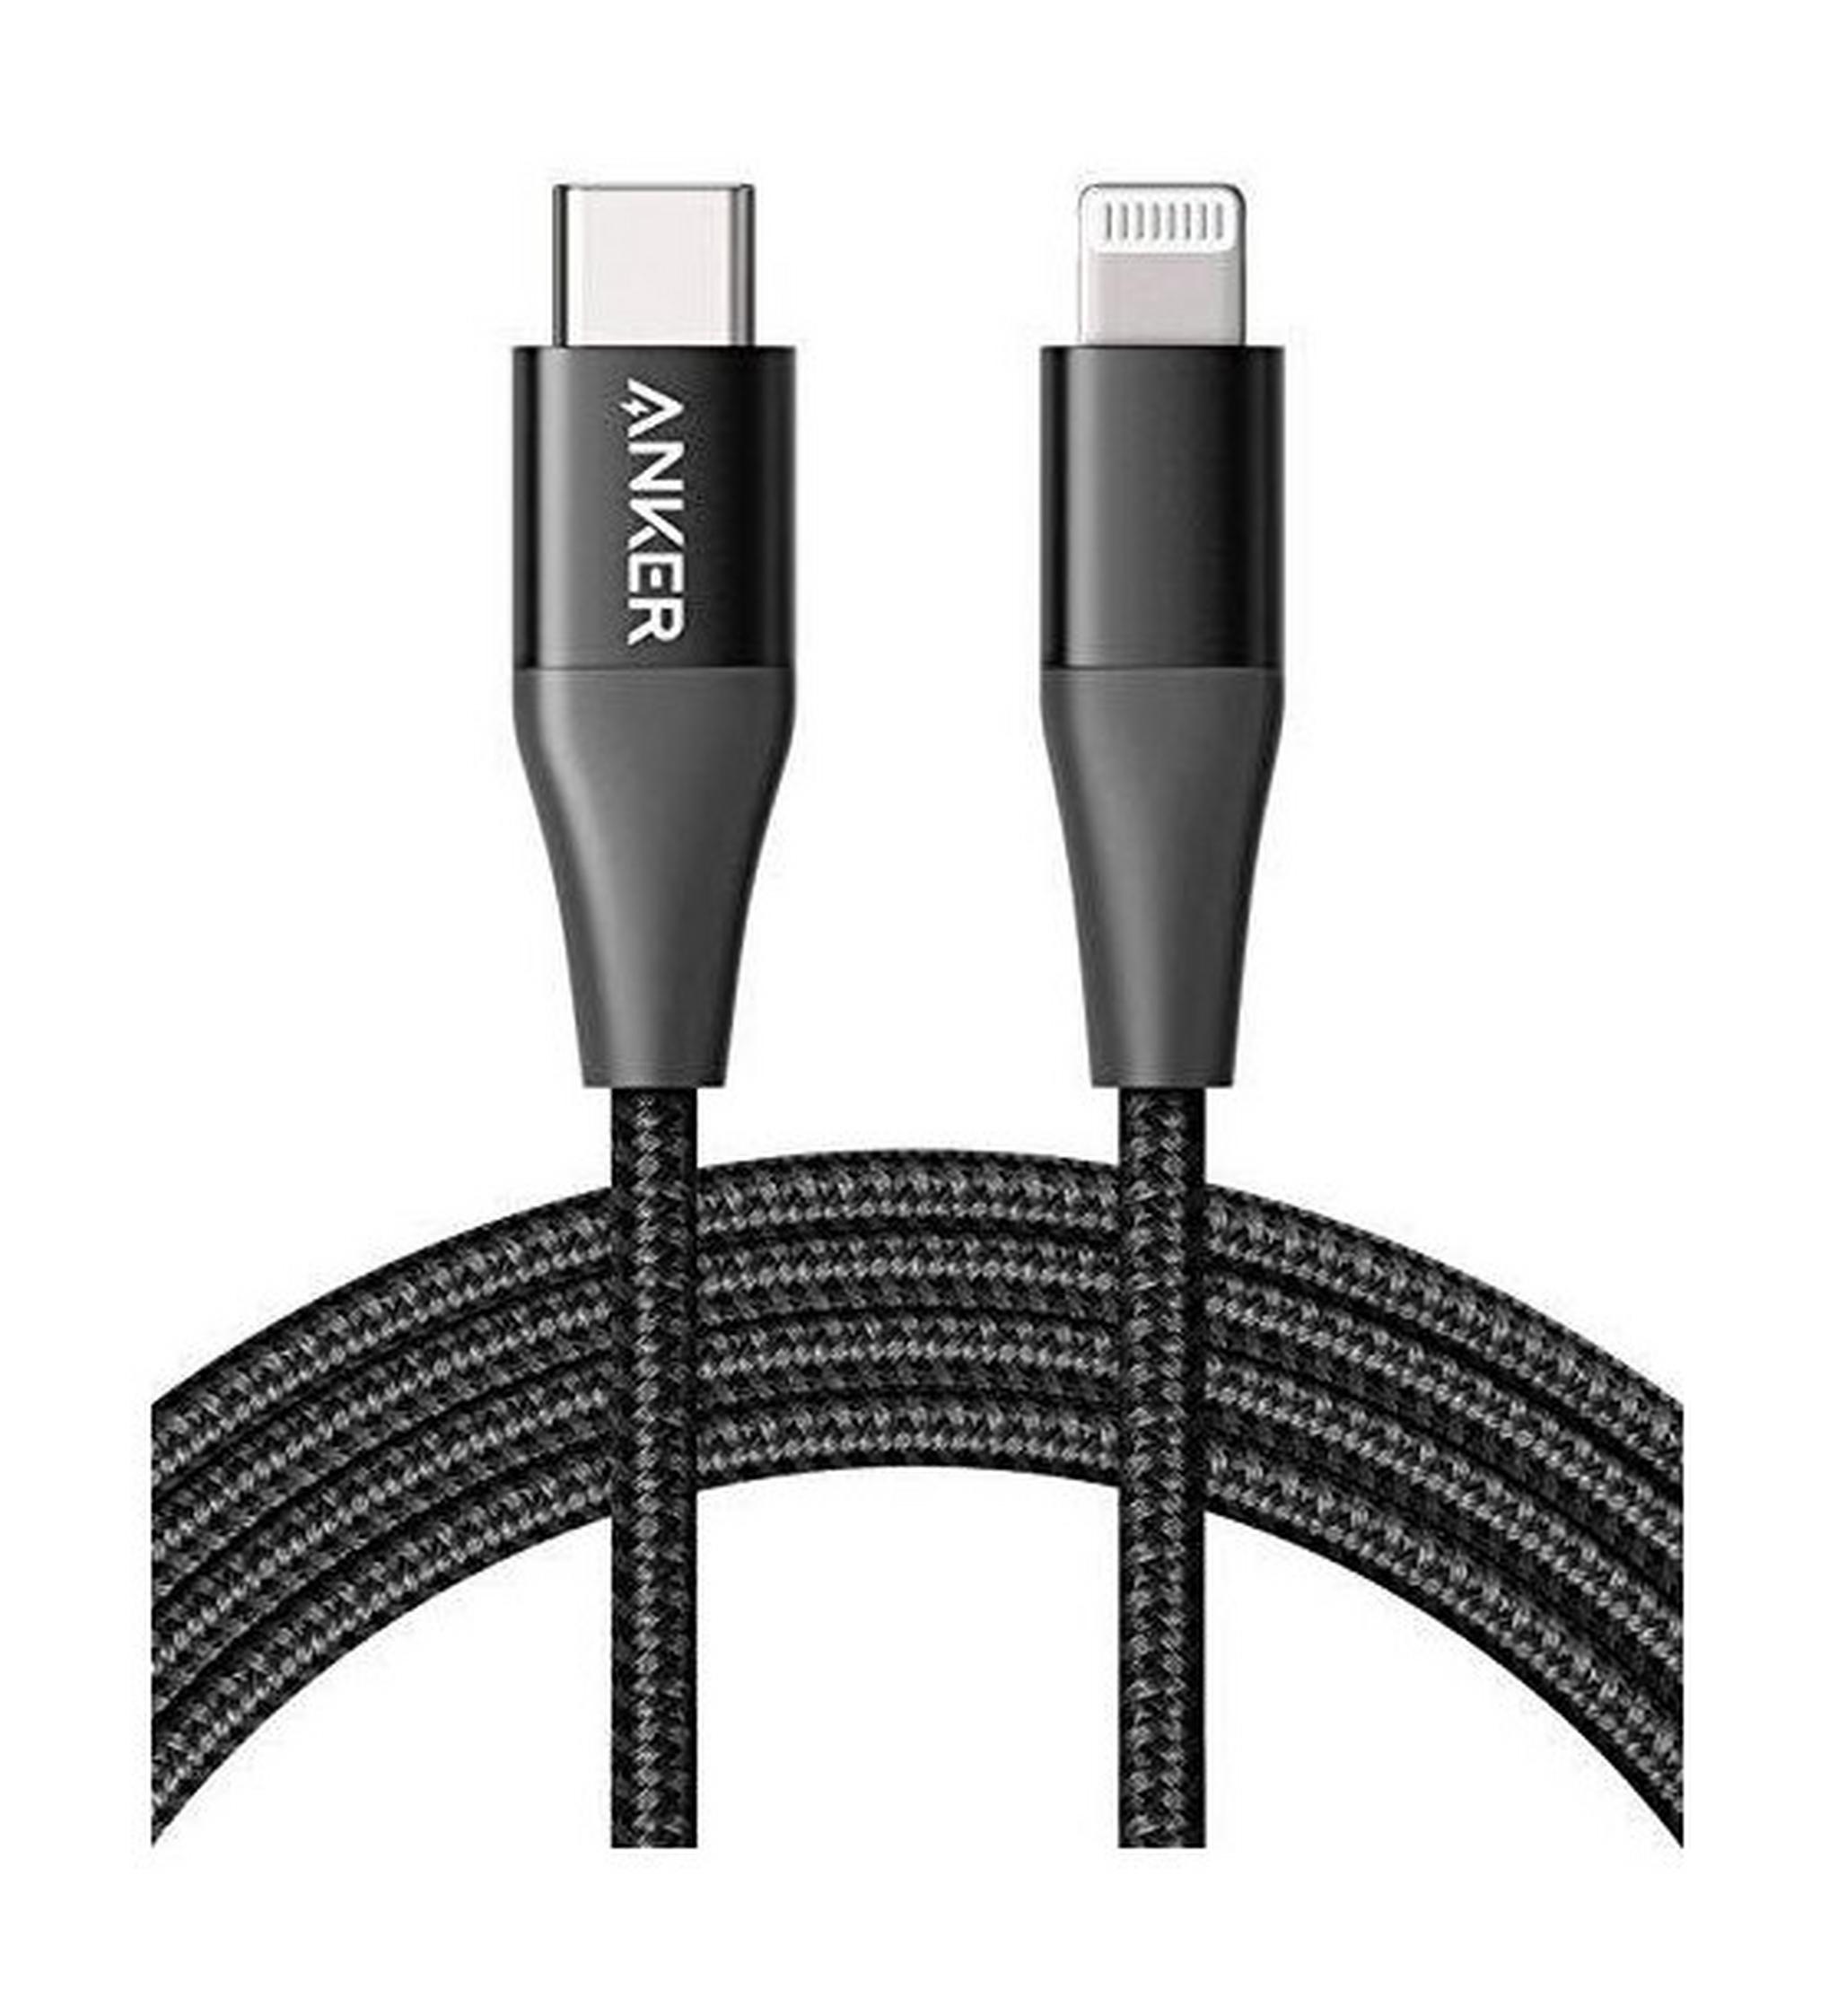 Anker PowerLine+ II USB-C to Lightning Cable, 0.9m, A8652H11 - Black